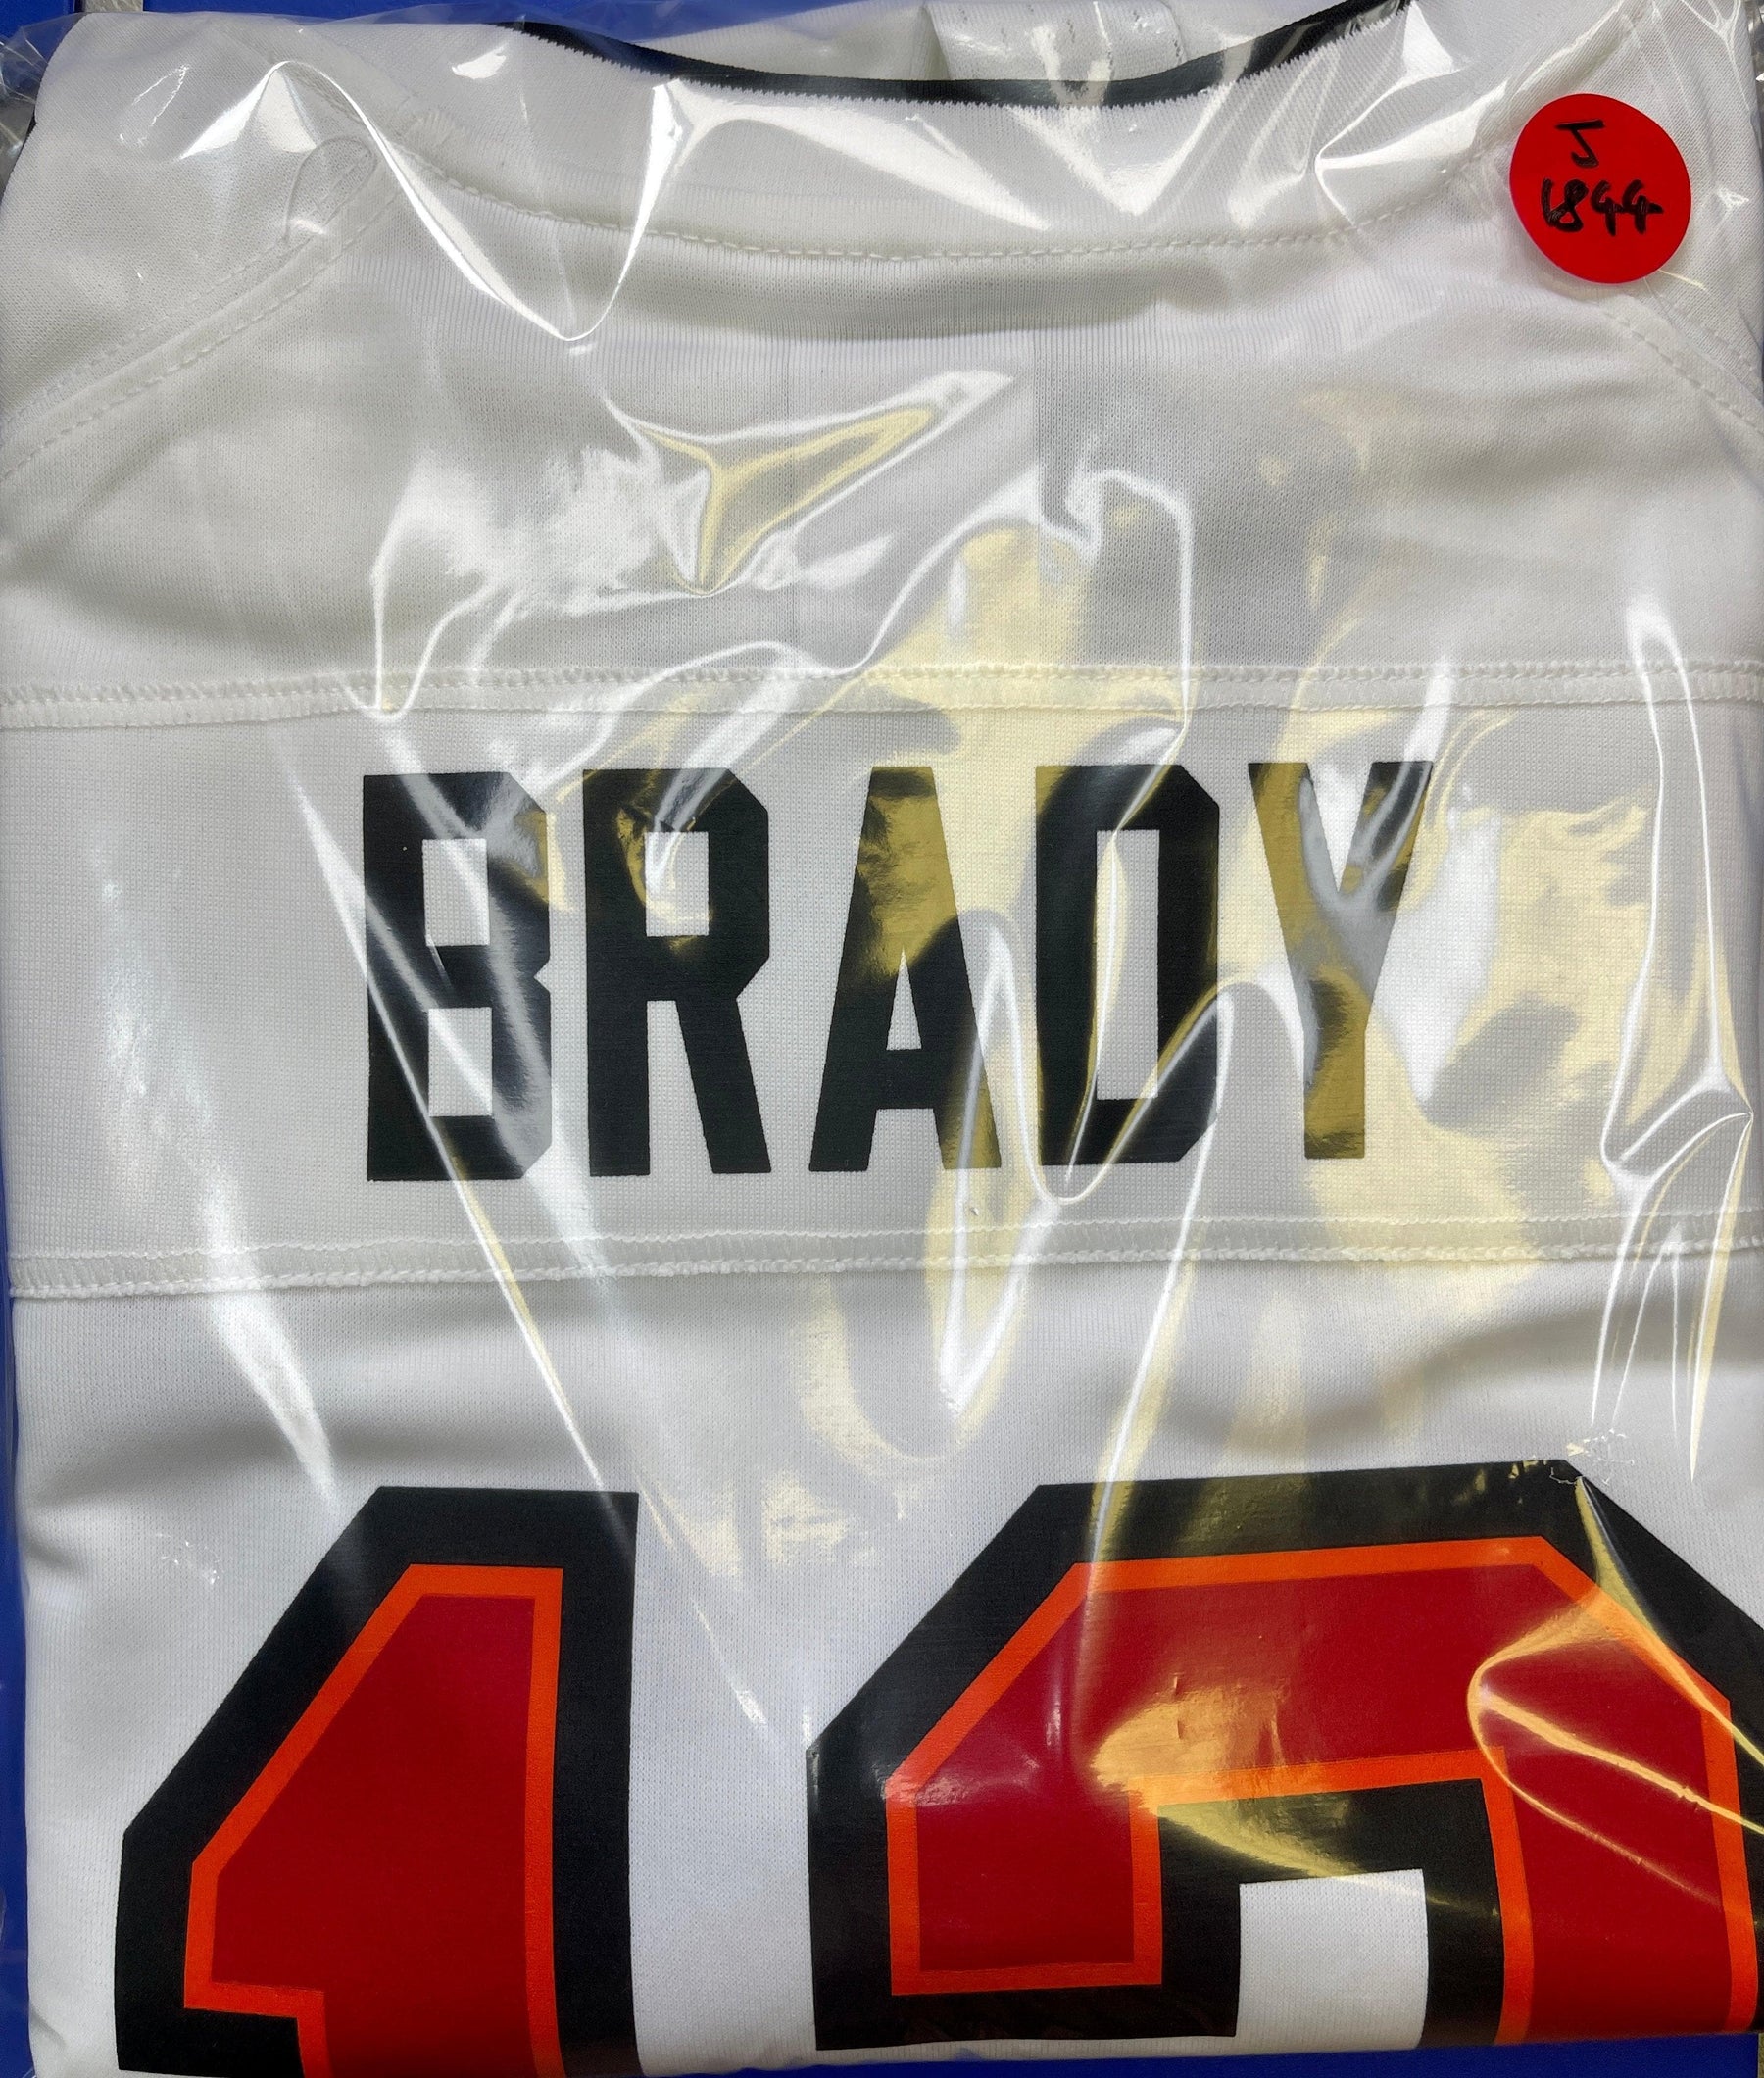 NFL Tampa Bay Buccaneers Tom Brady #12 Game Jersey Women's Small NWT